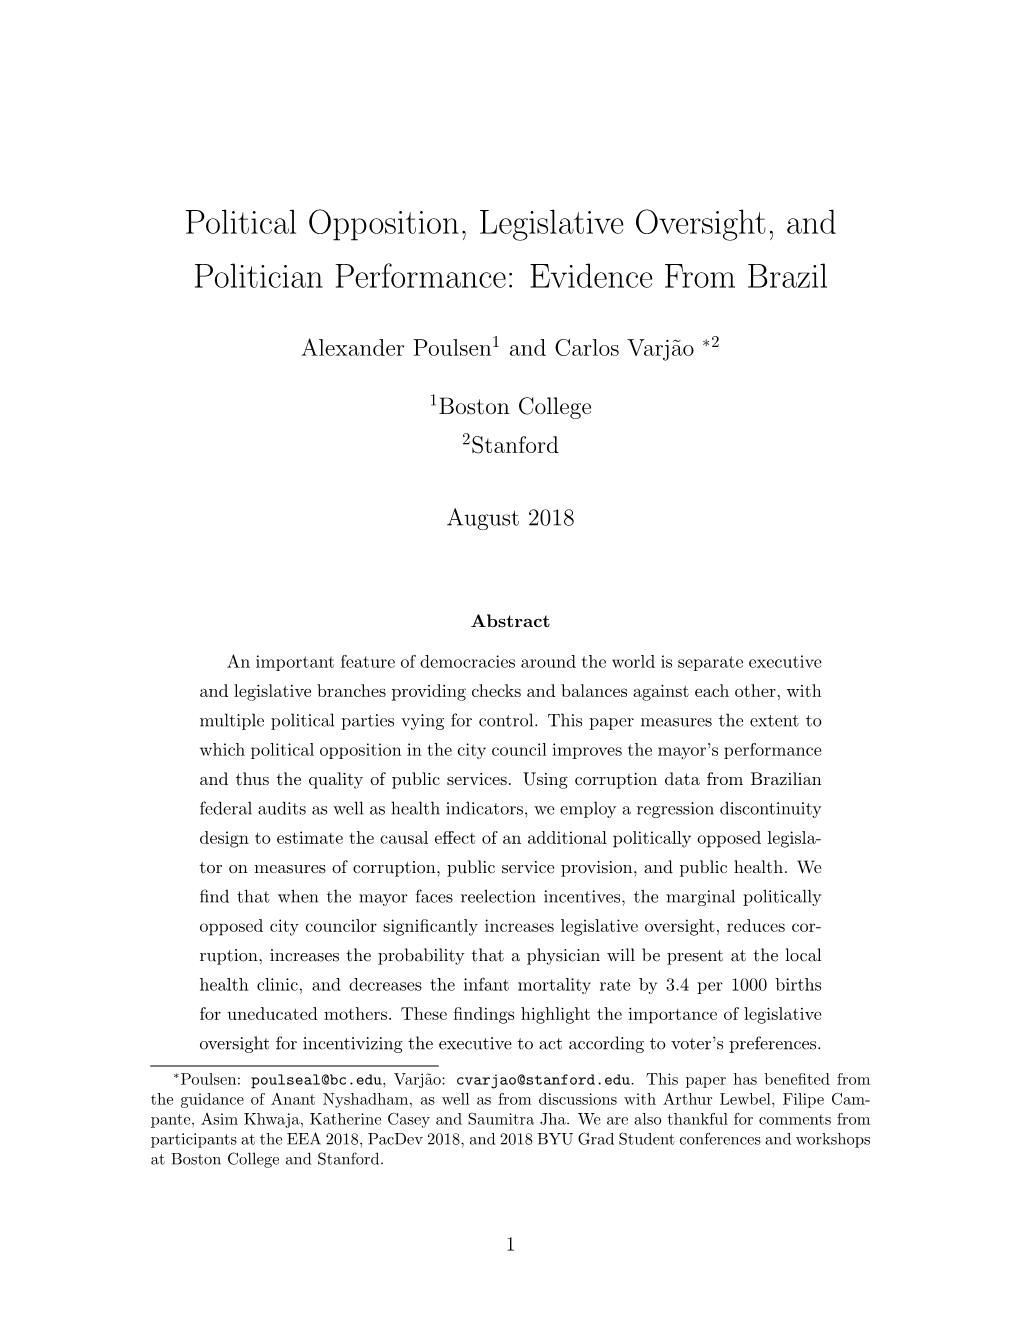 Political Opposition, Legislative Oversight, and Politician Performance: Evidence from Brazil